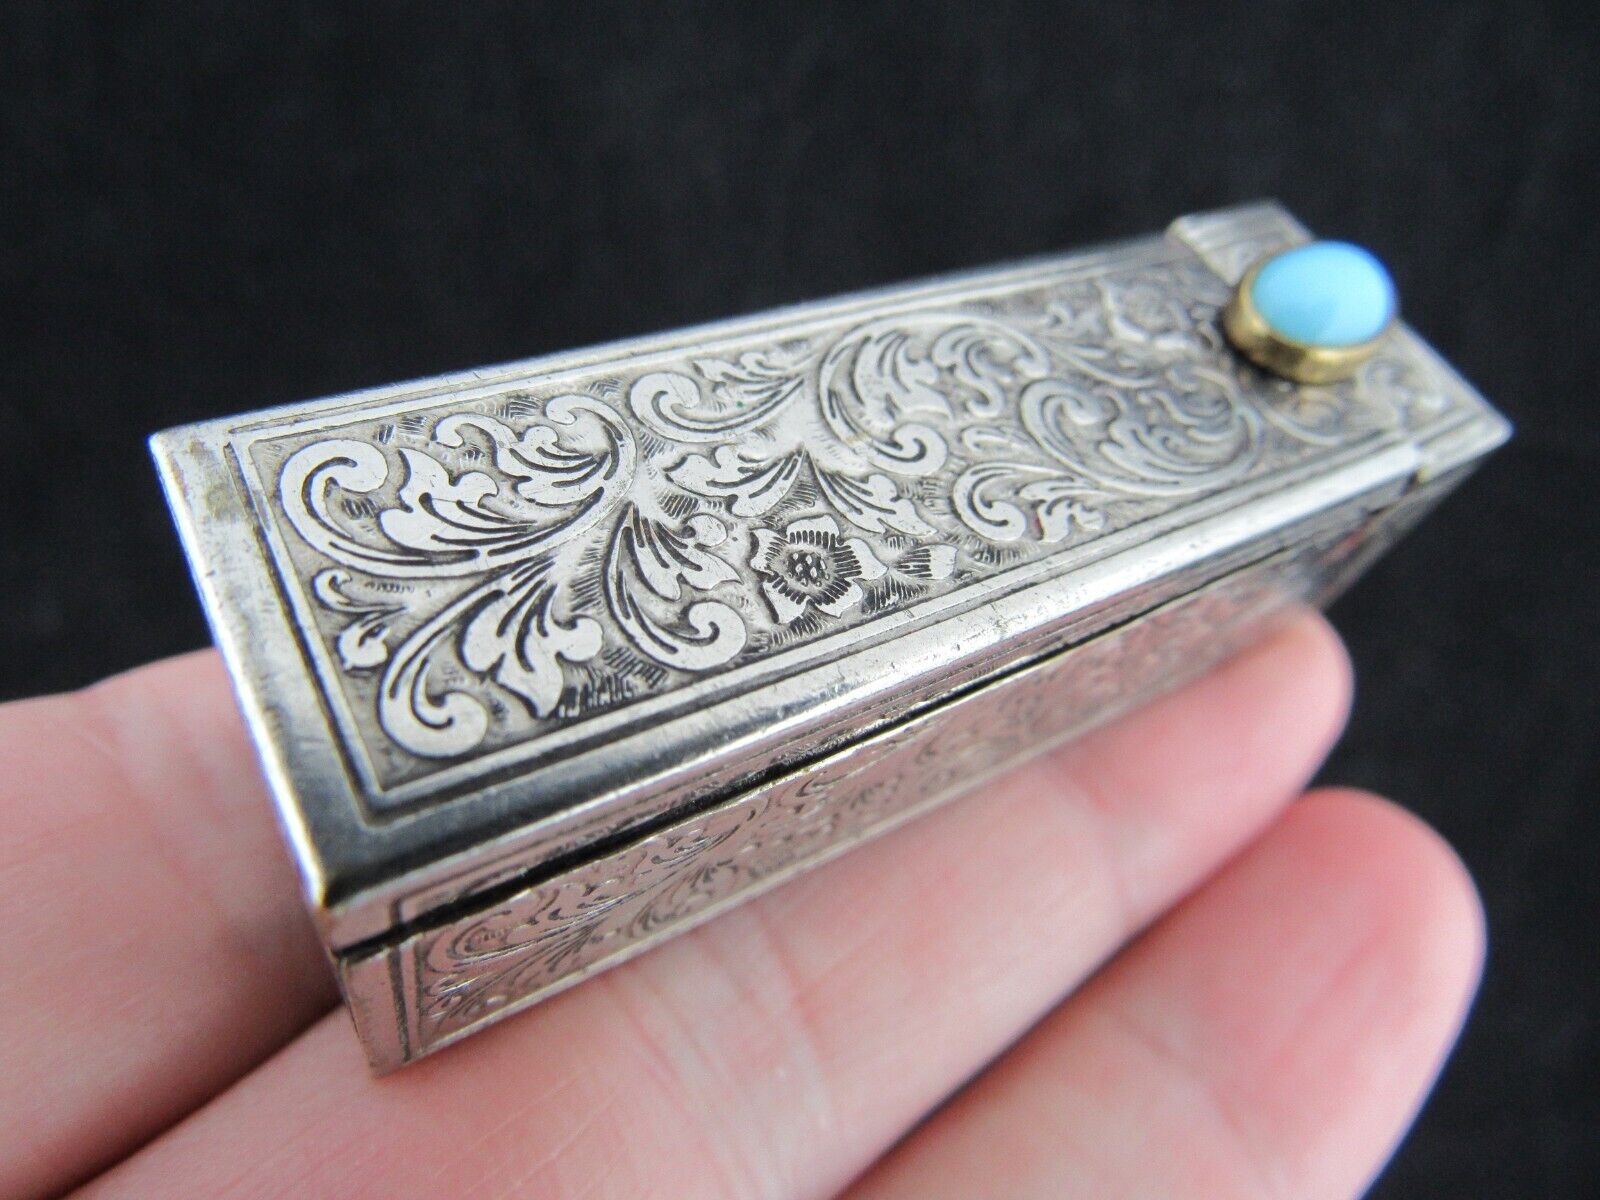 Italian vintage Sterling Silver 800 Lipstick Case with Mirror 1930s